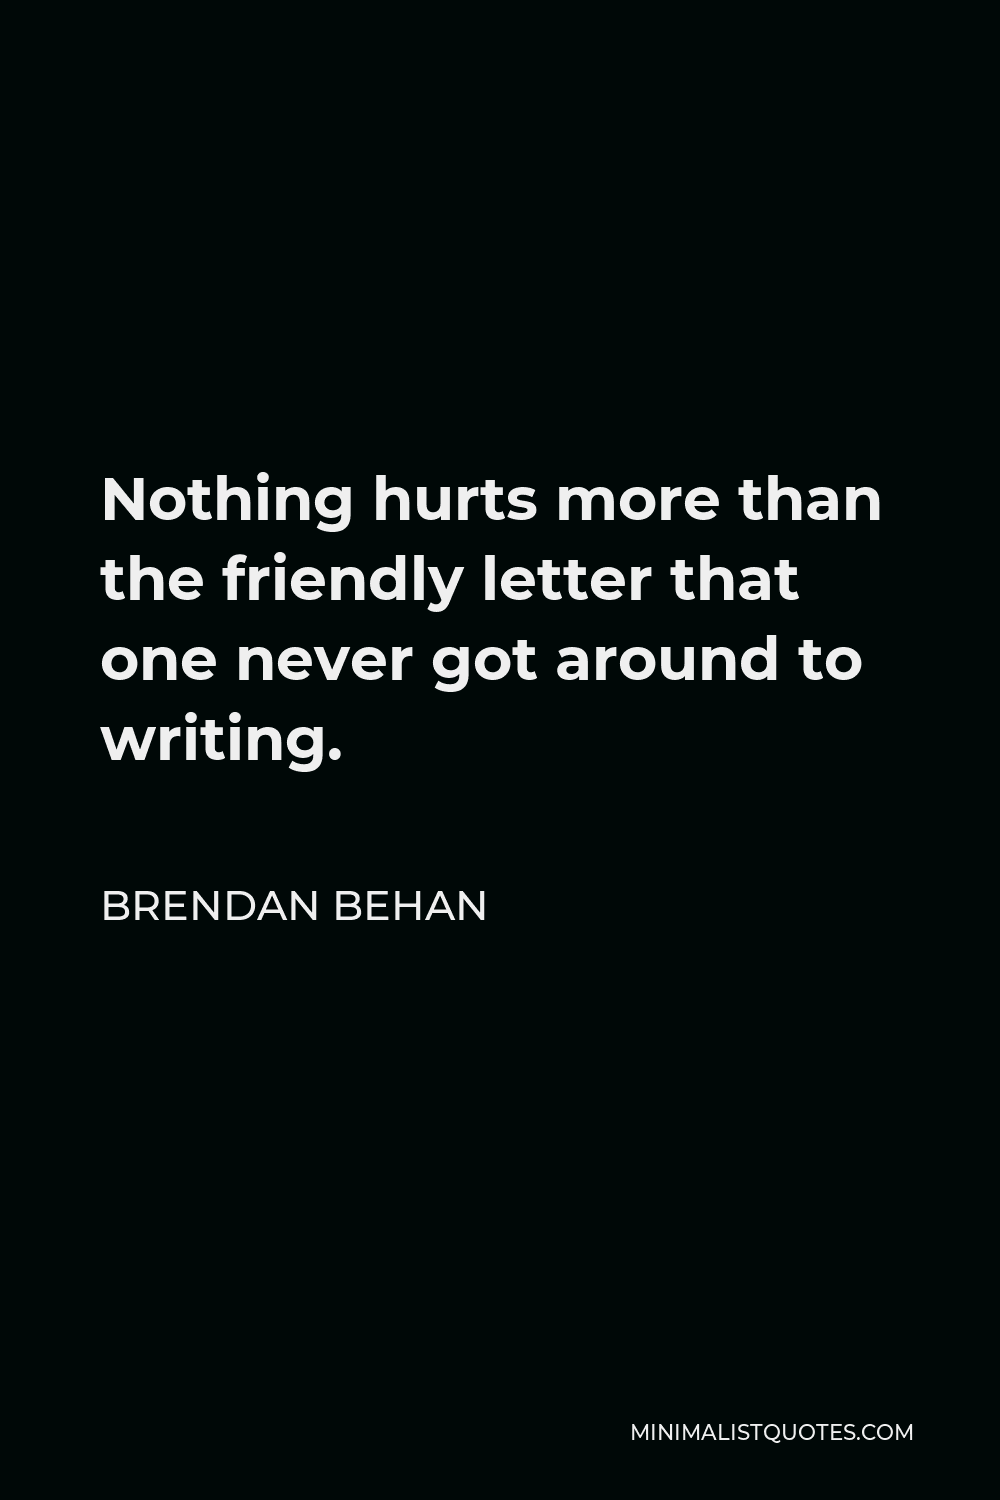 Brendan Behan Quote - Nothing hurts more than the friendly letter that one never got around to writing.